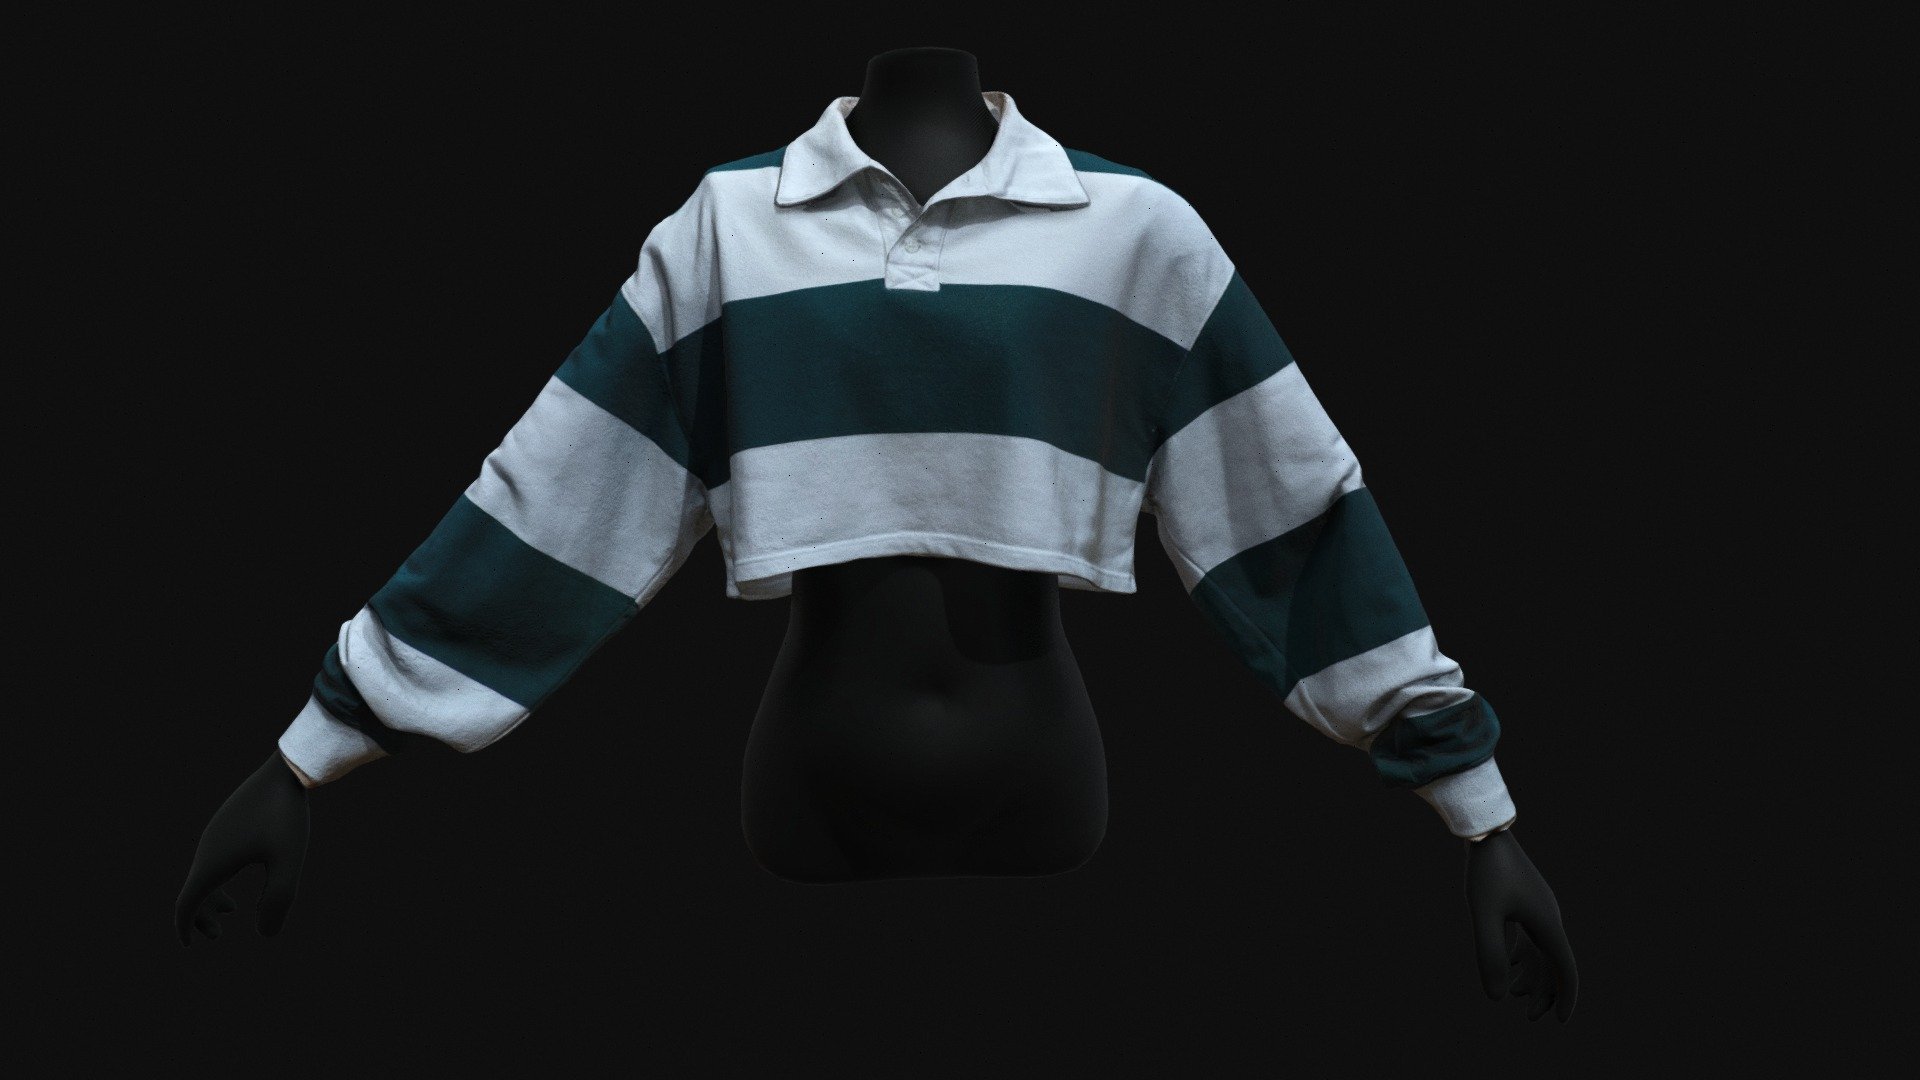 Short fitted top with bare navel long sleeve basic shirt with green and white stripes. High resolution 3D scanning with low poly retopology 3d model